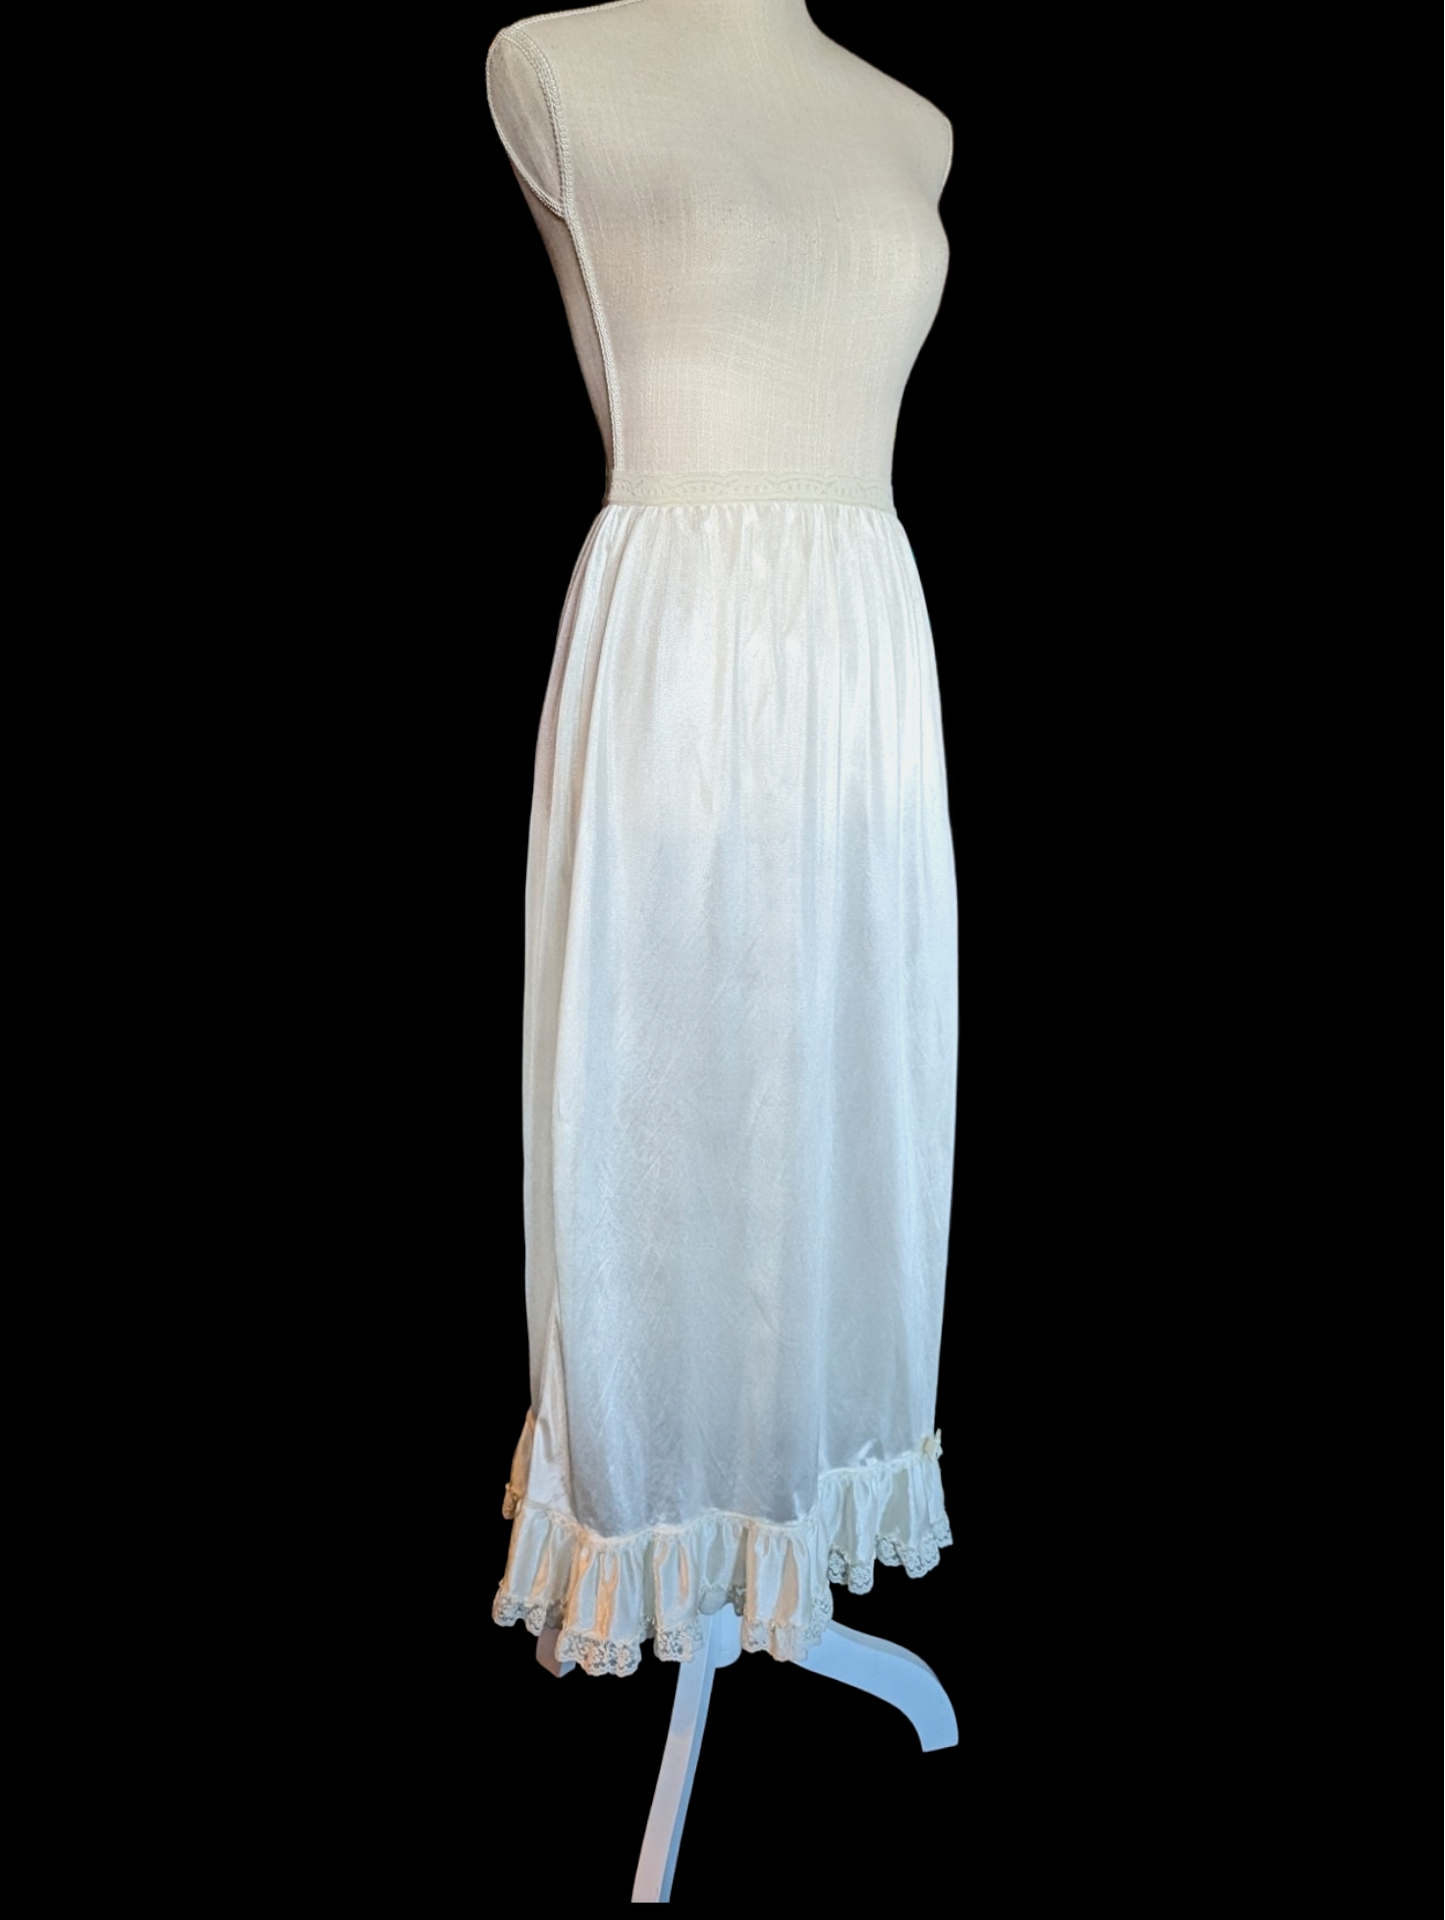 1960s Her Majesty Soft White Nylon Slip Skirt with Ruffles and Bow